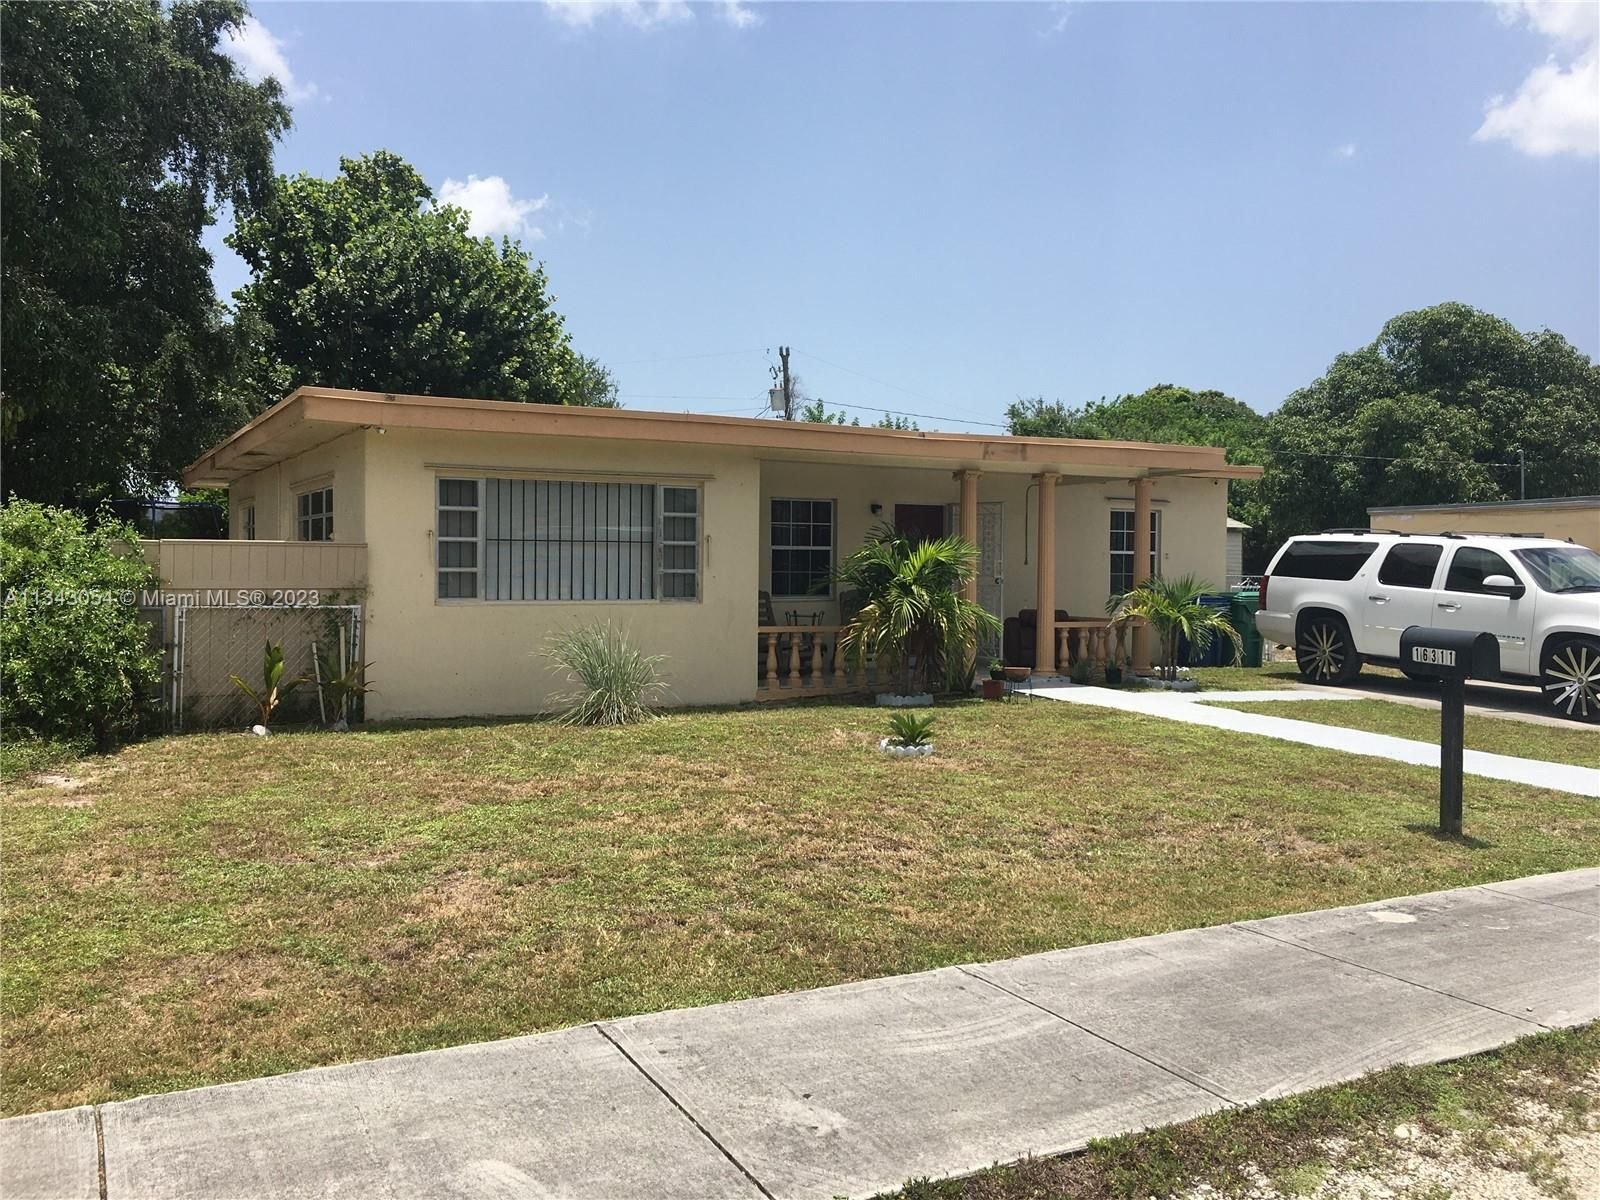 Real estate property located at 16311 21st Ave, Miami-Dade County, Miami Gardens, FL